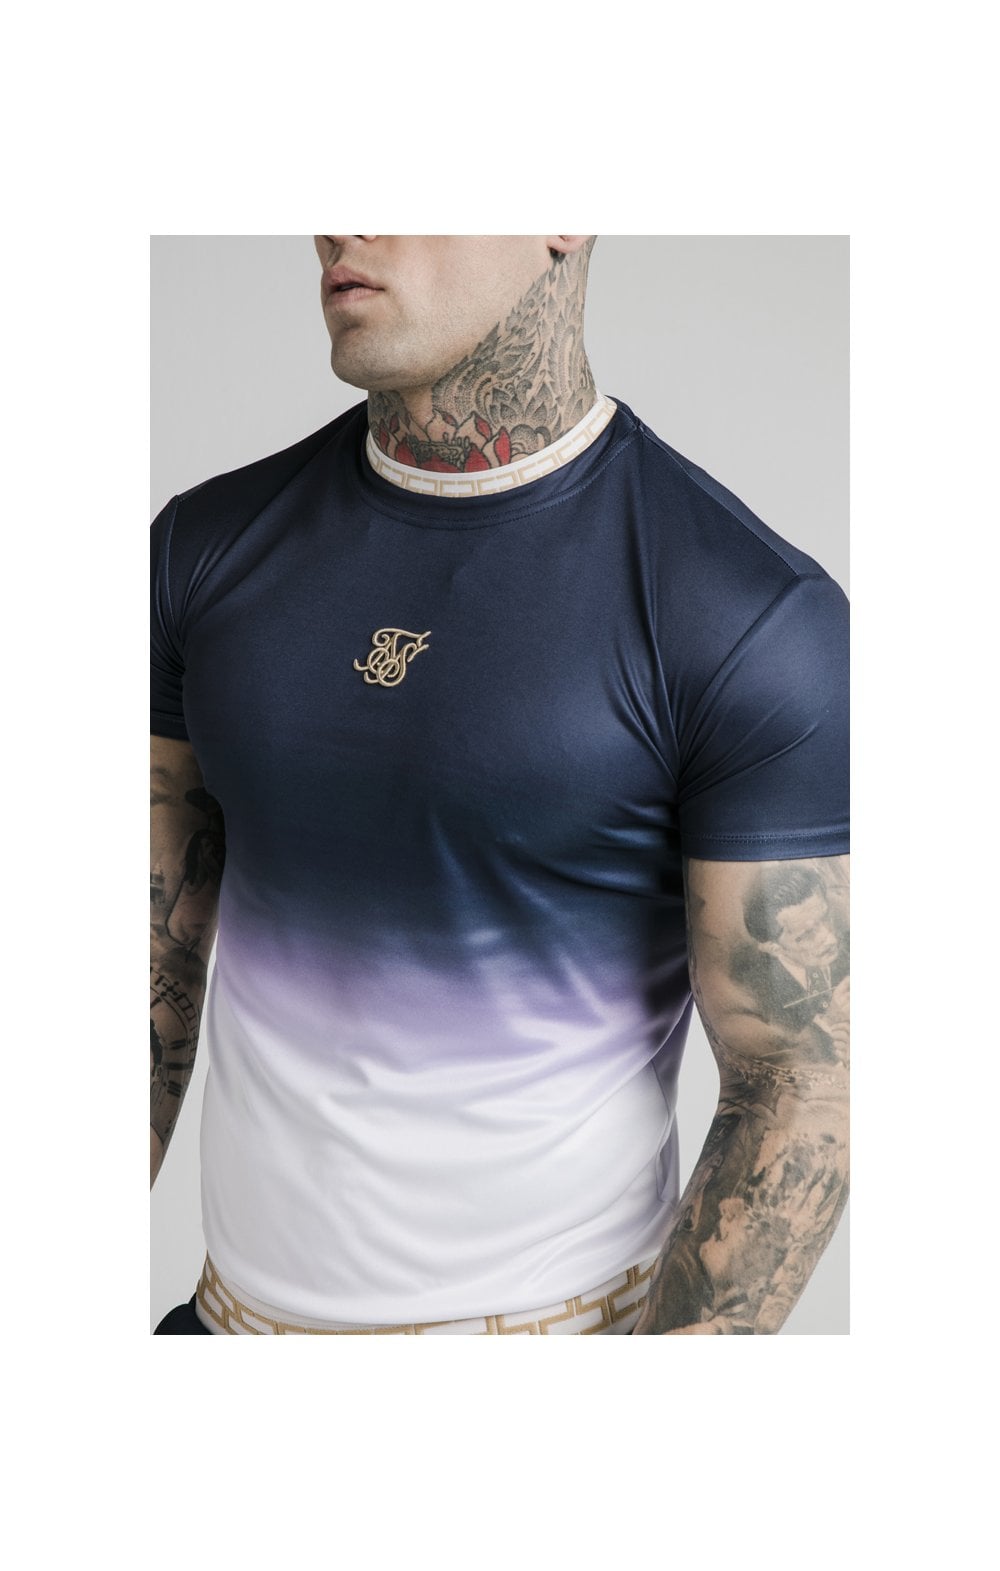 SikSilk S/S Fade Inset Tape Gym Tee - Navy & White (1)